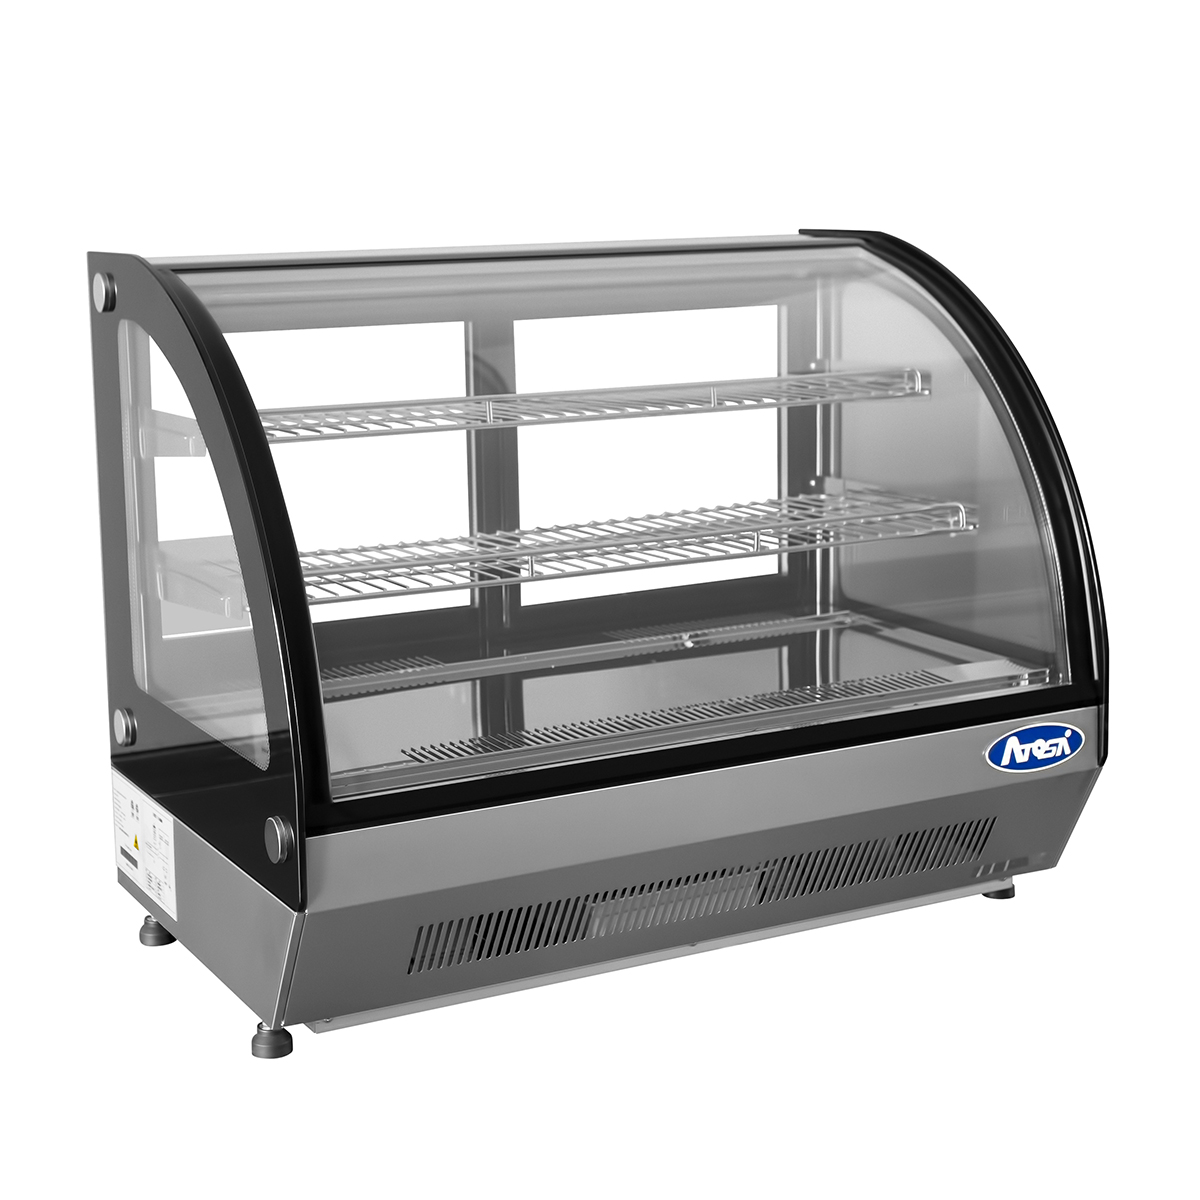 Atosa CRDC-35 Refrigerated Countertop Display Case, 3.5 cu.ft. - 27-3/5"W x 22-1/10"D x 26-2/5"H image 1